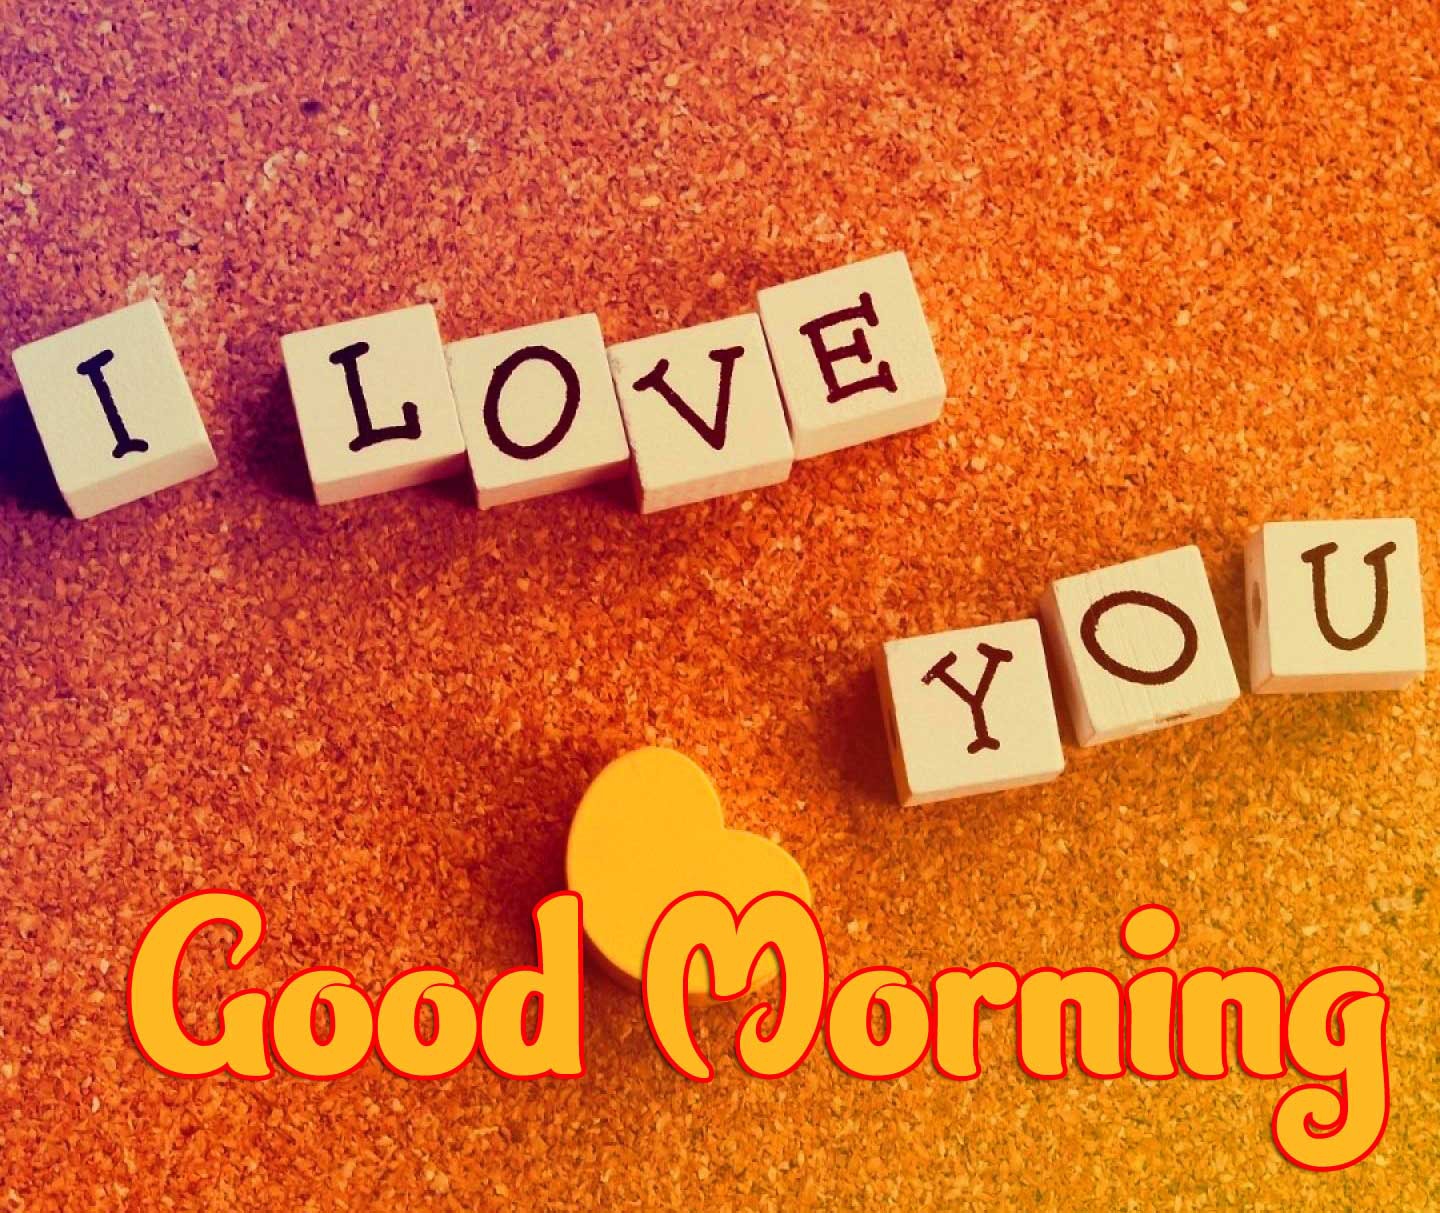 1080p Good Morning Pics Images With I love you 